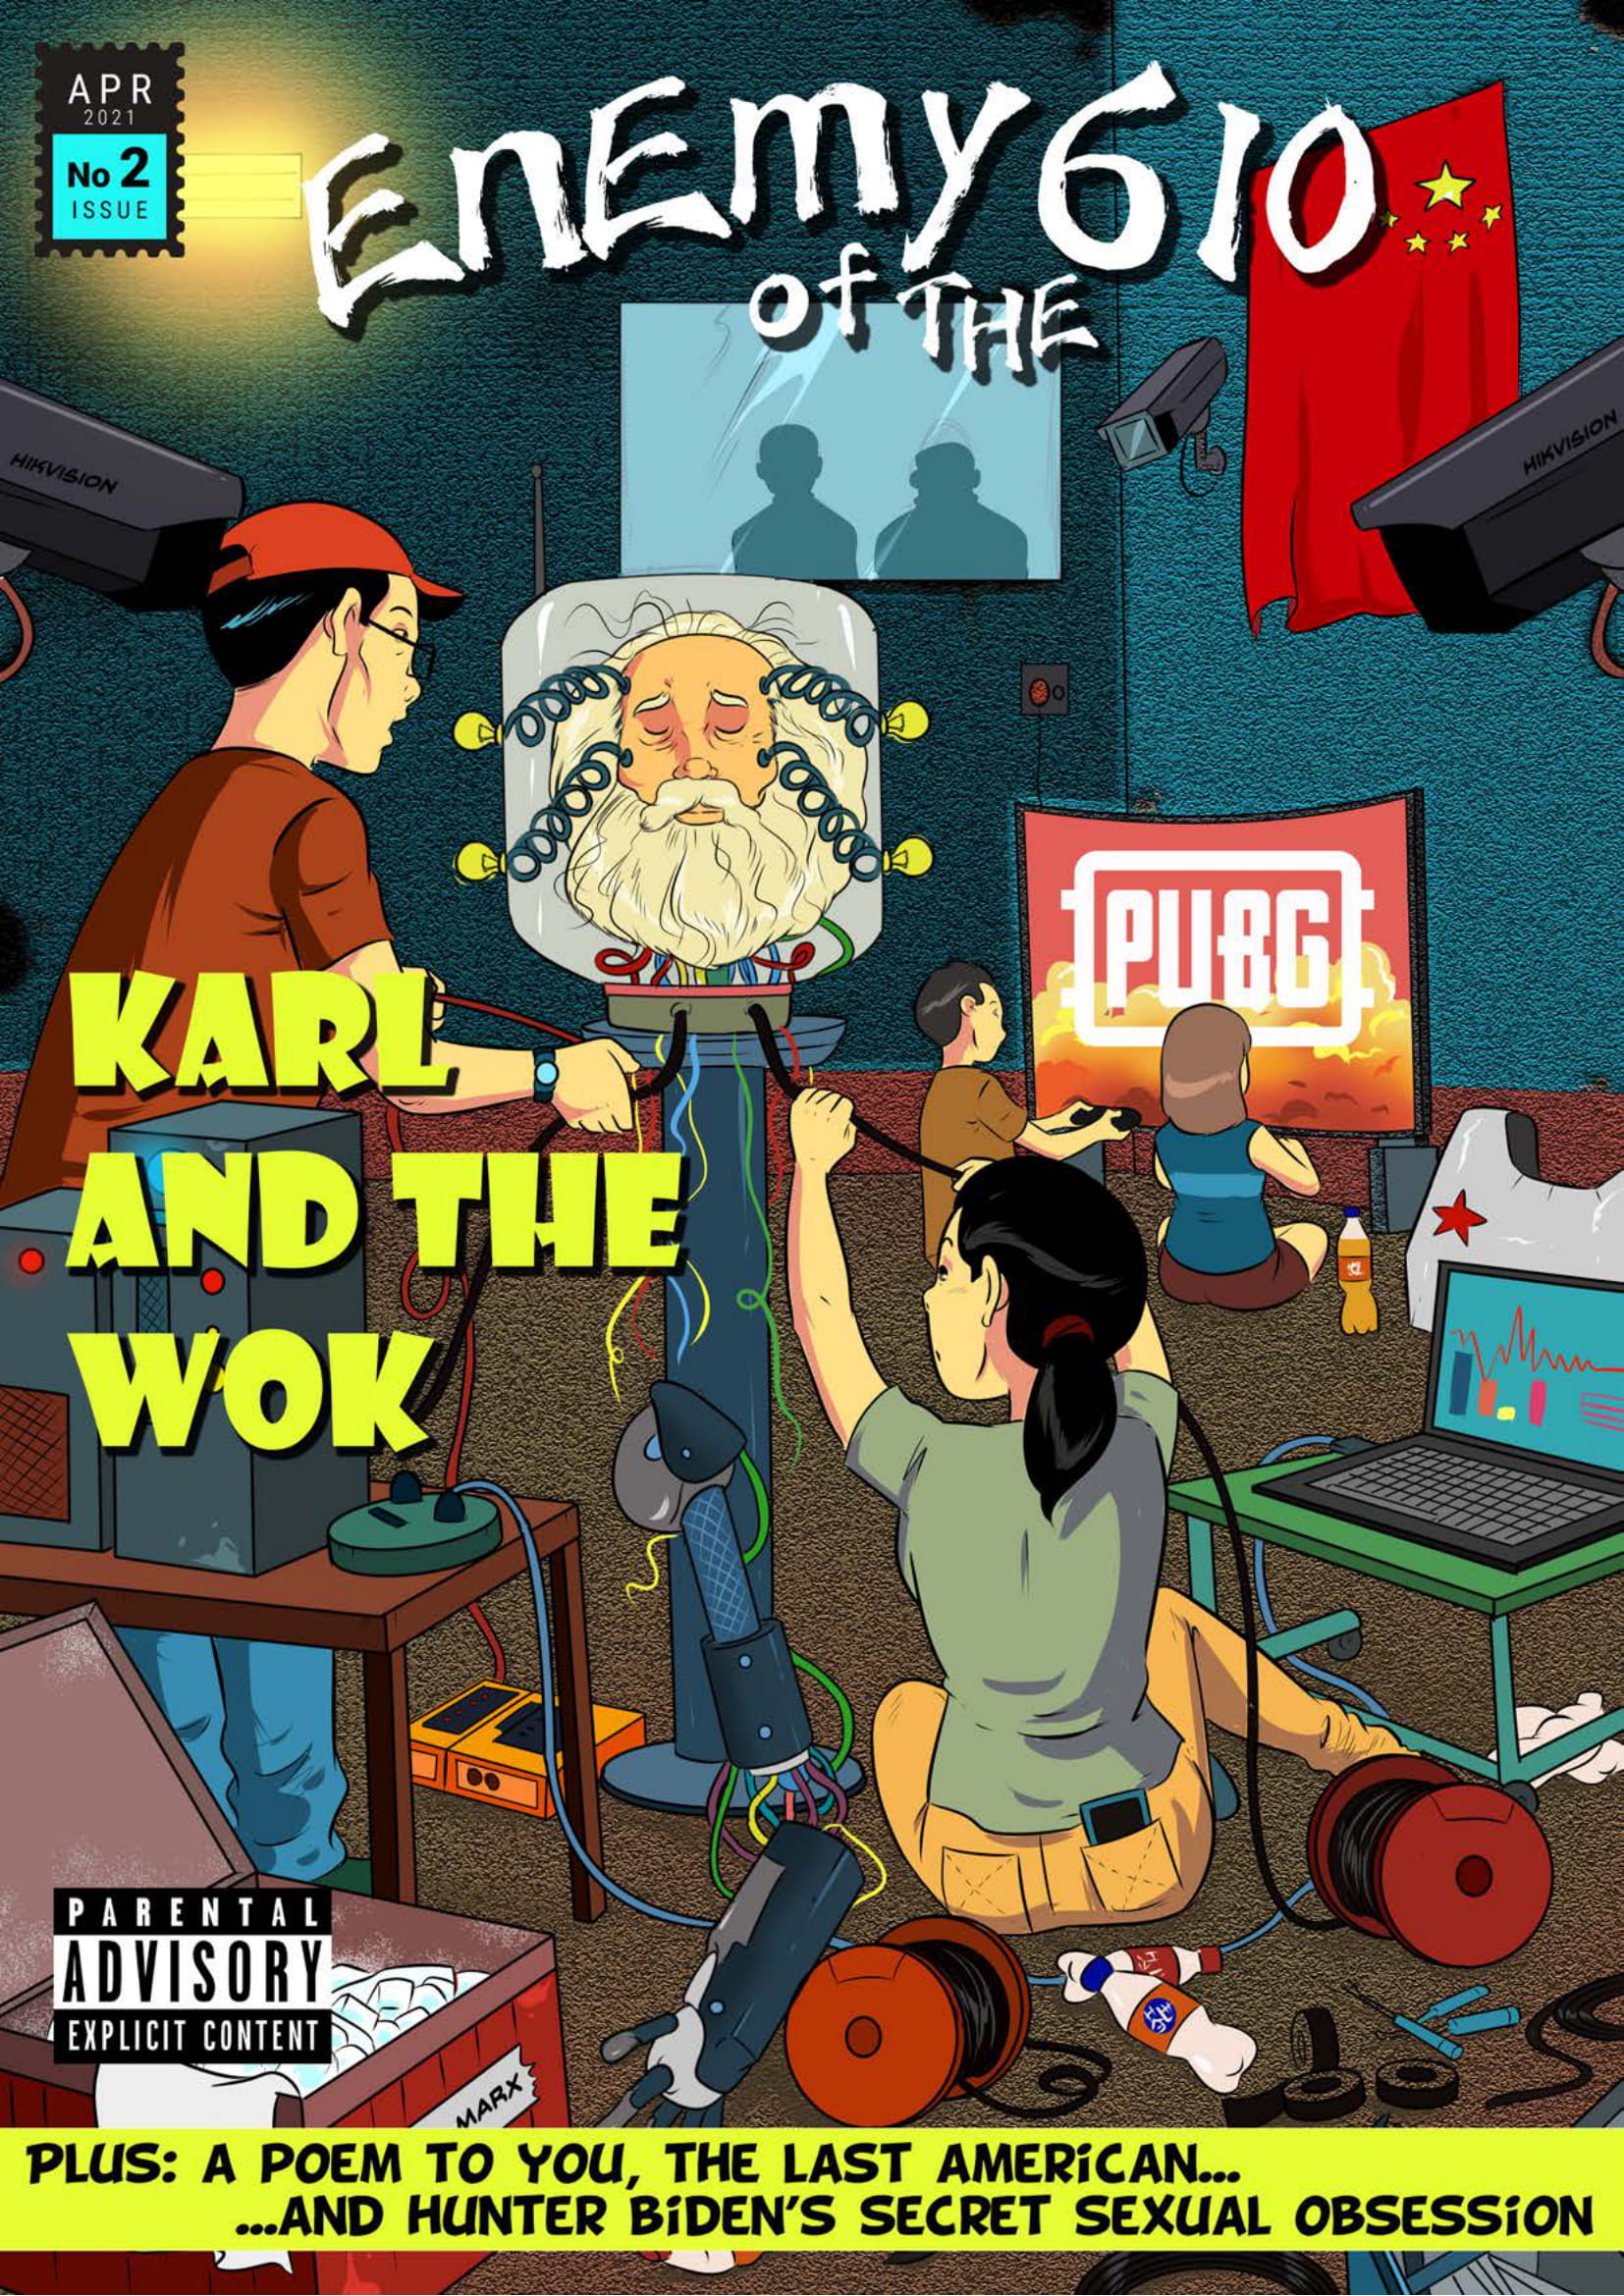 Issue 2 Karl and the Wok-01